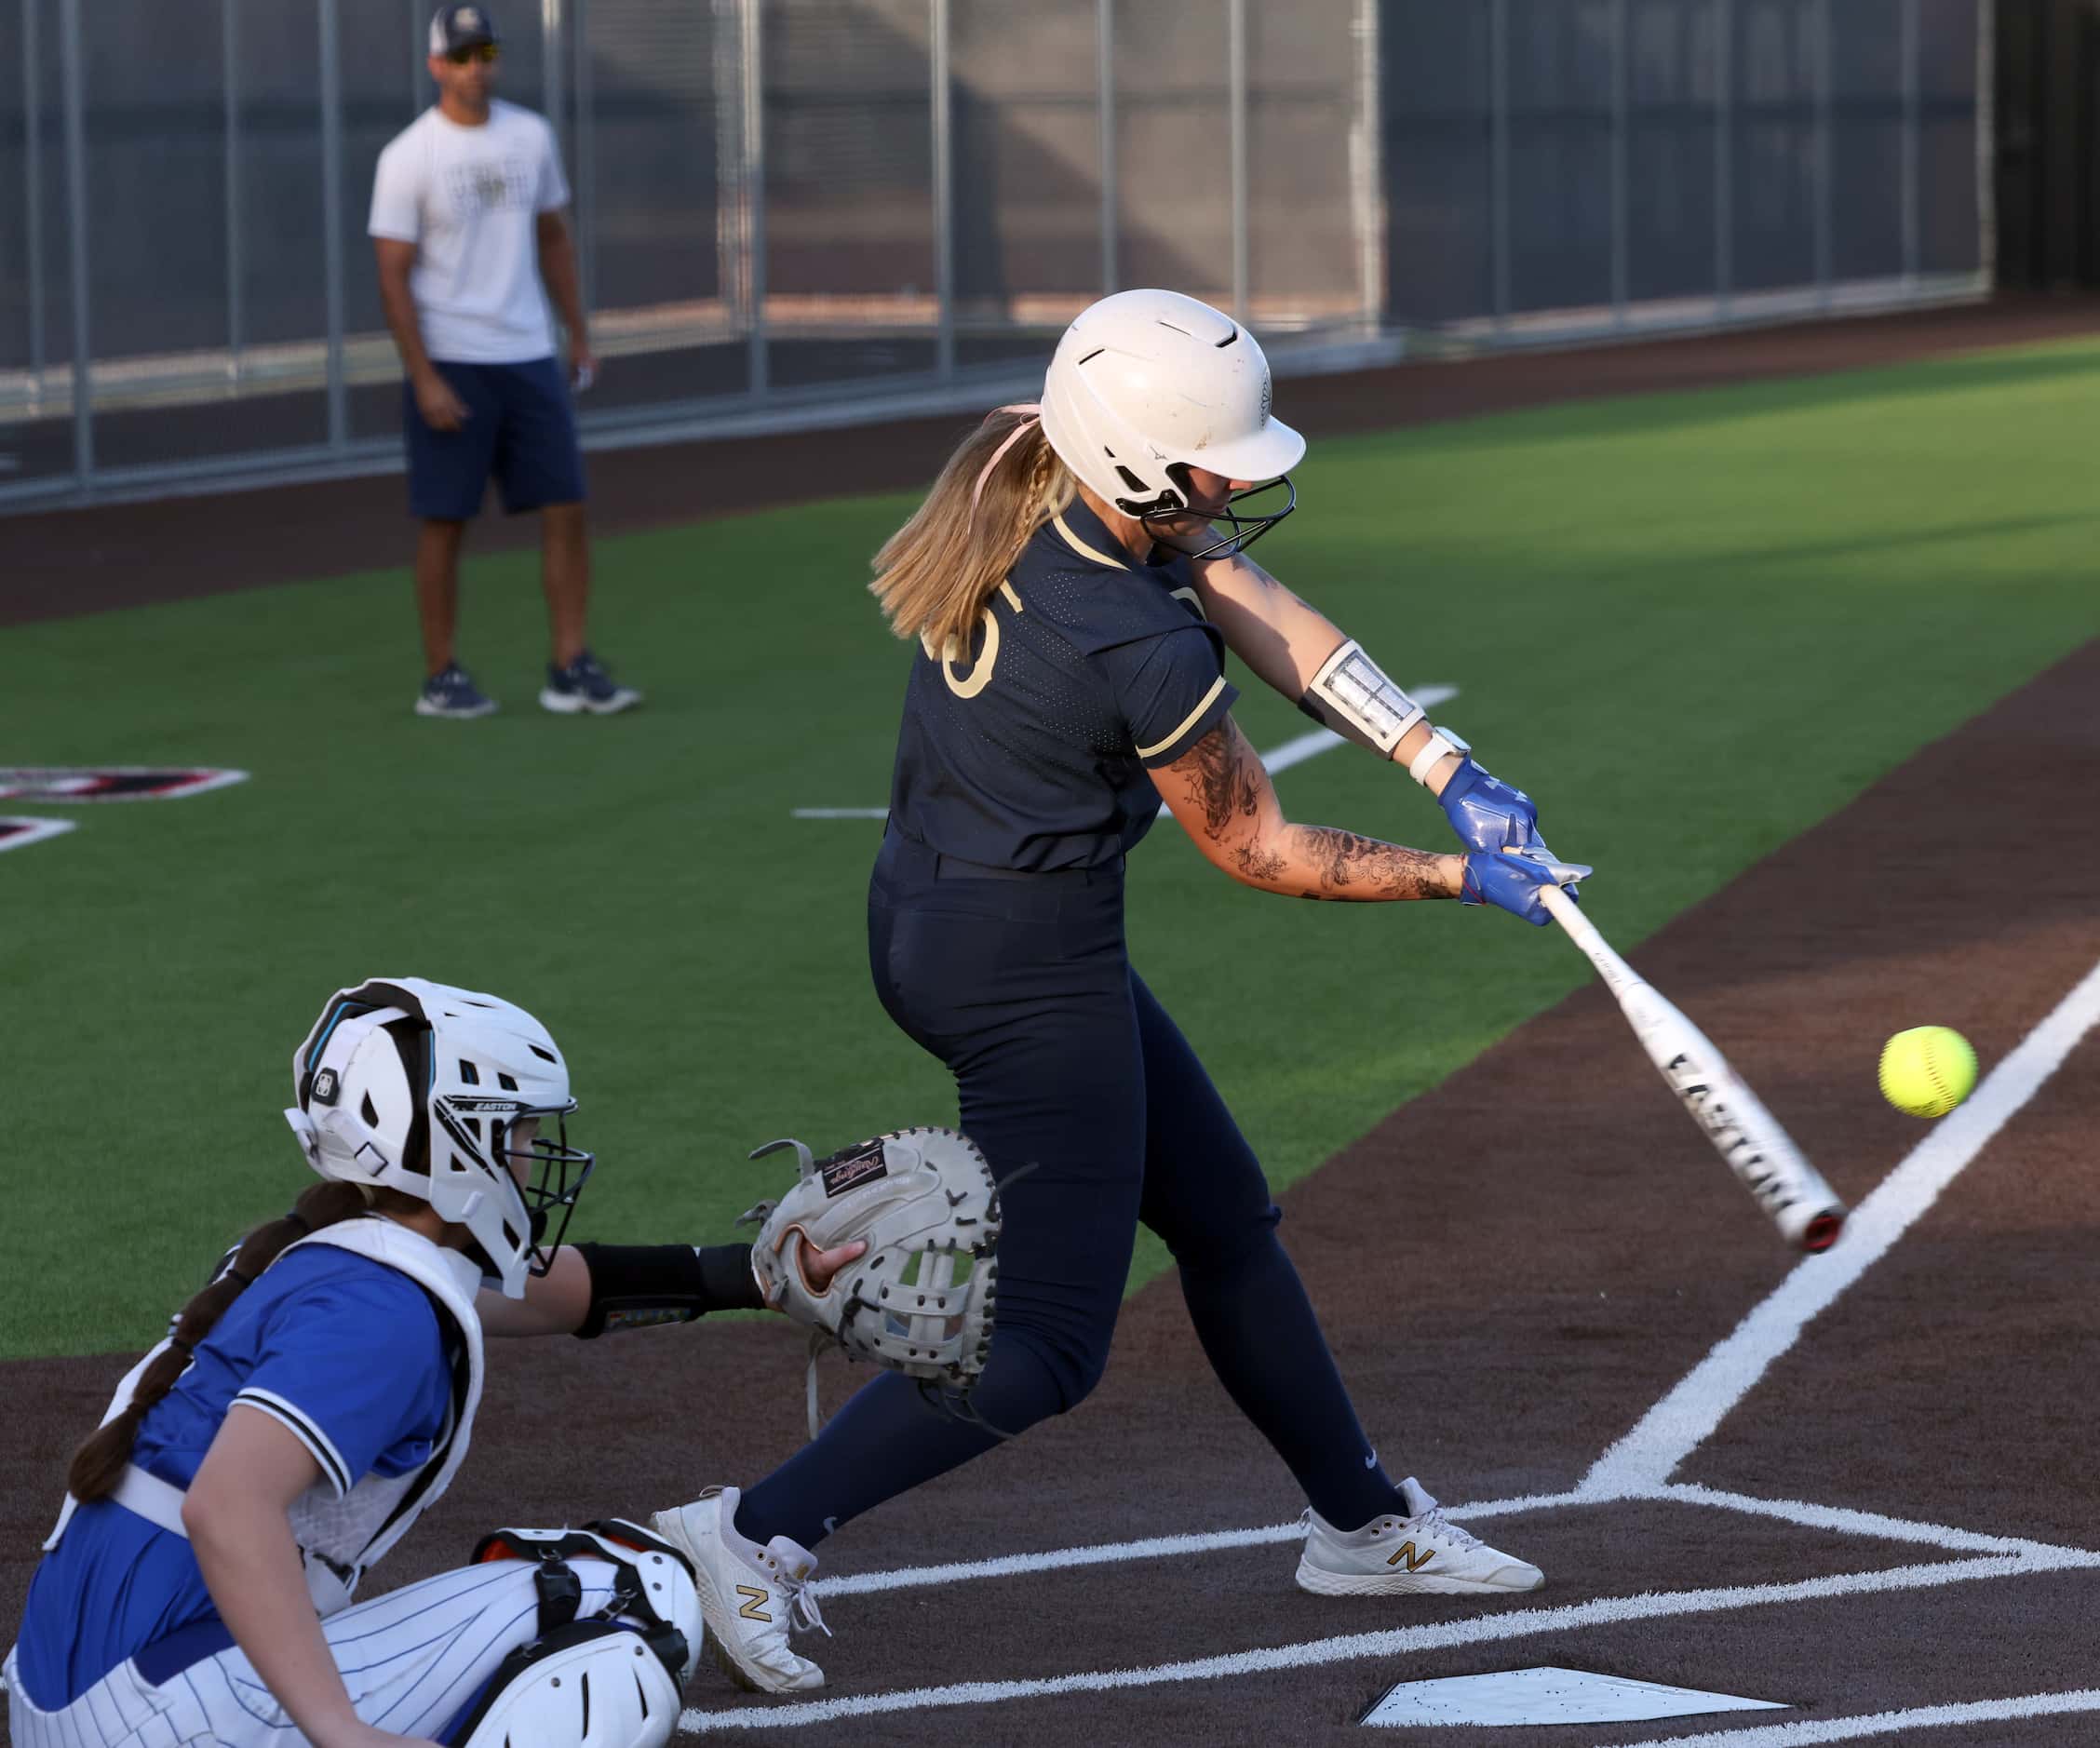 Keller's Carley Genzer (15) drives a pitch to the outfield during the top of the 4th inning...